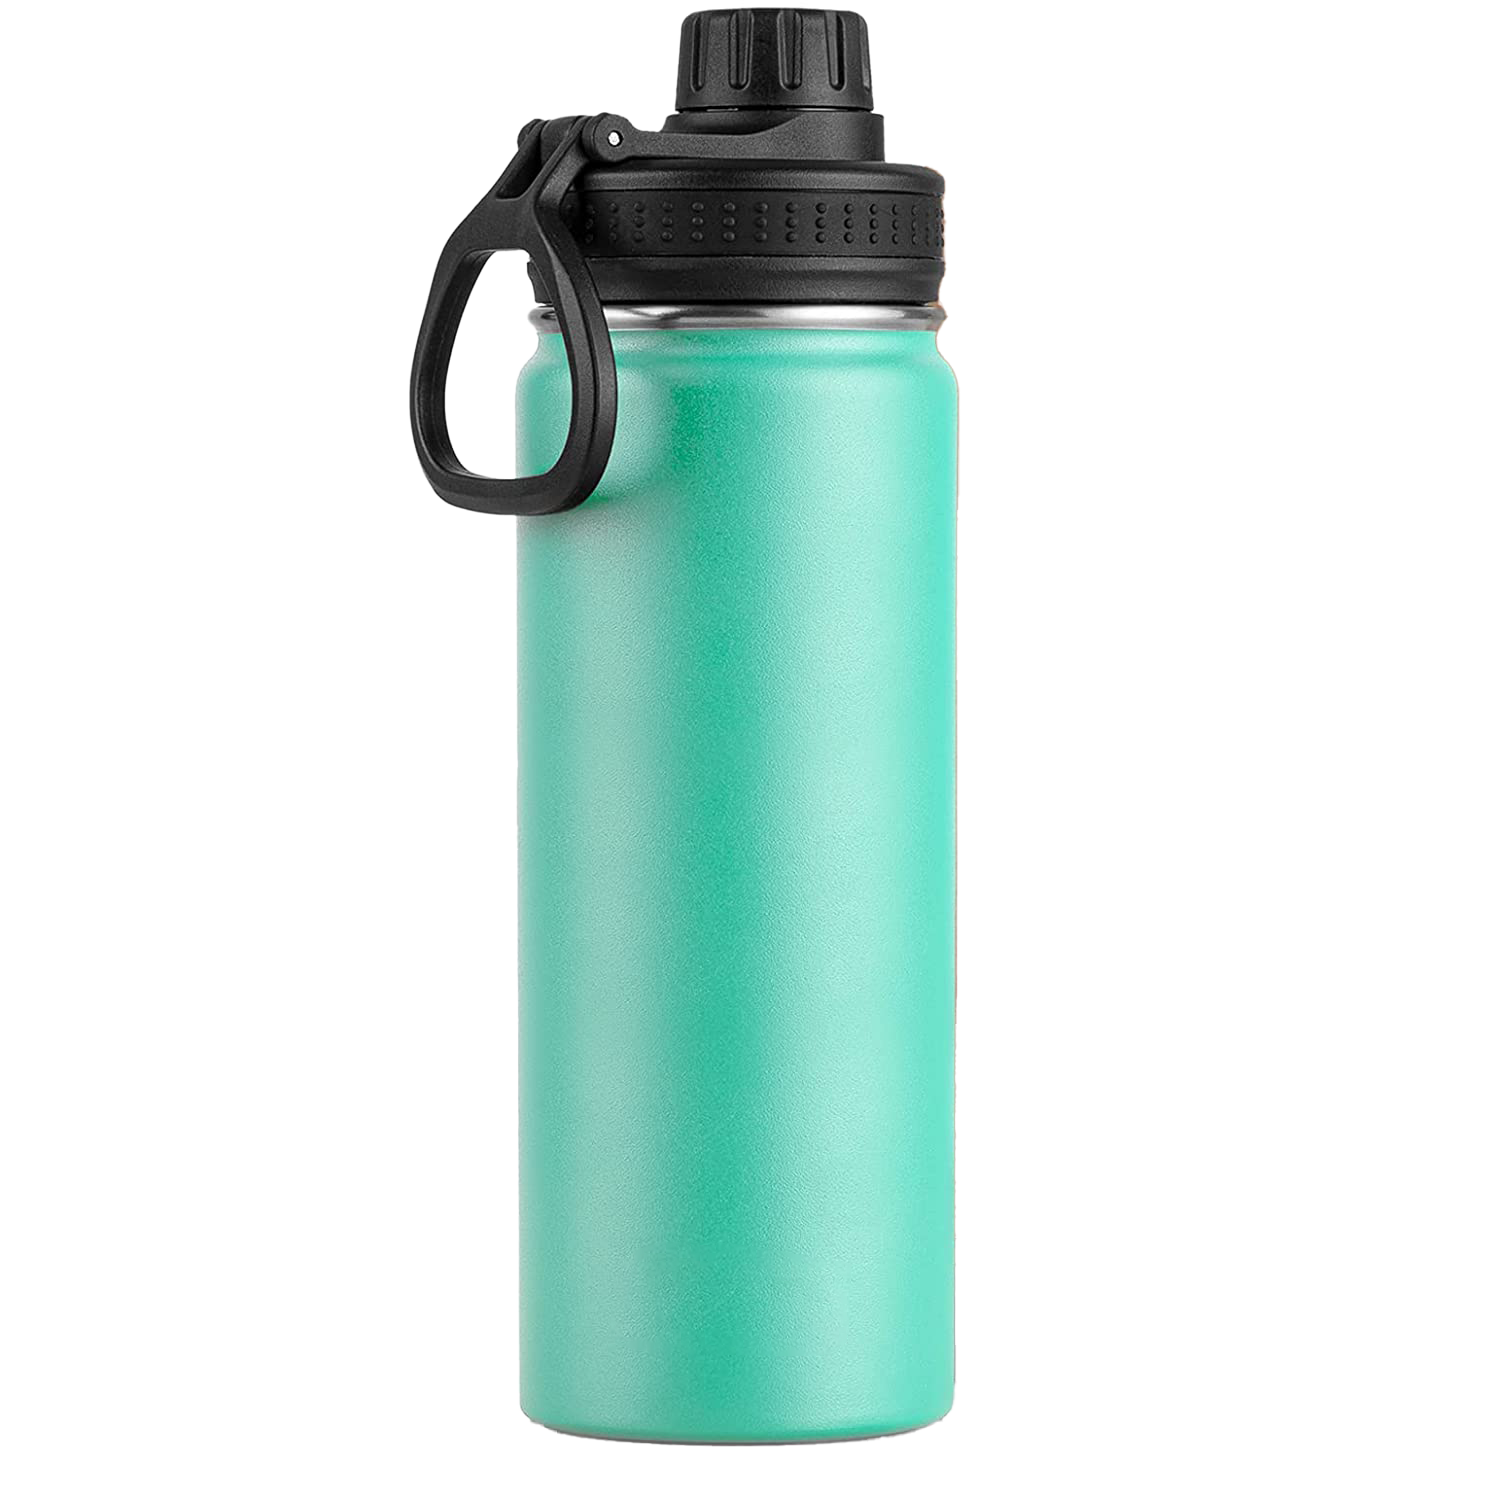 Umite Chef Water Bottle, Vacuum Insulated Wide Mouth Stainless-Steel Sports  Water Bottle with New Wide Handle Straw Lid,Hot Cold, 18 oz Double Walled  Thermos Mug(Mint Green) - Yahoo Shopping